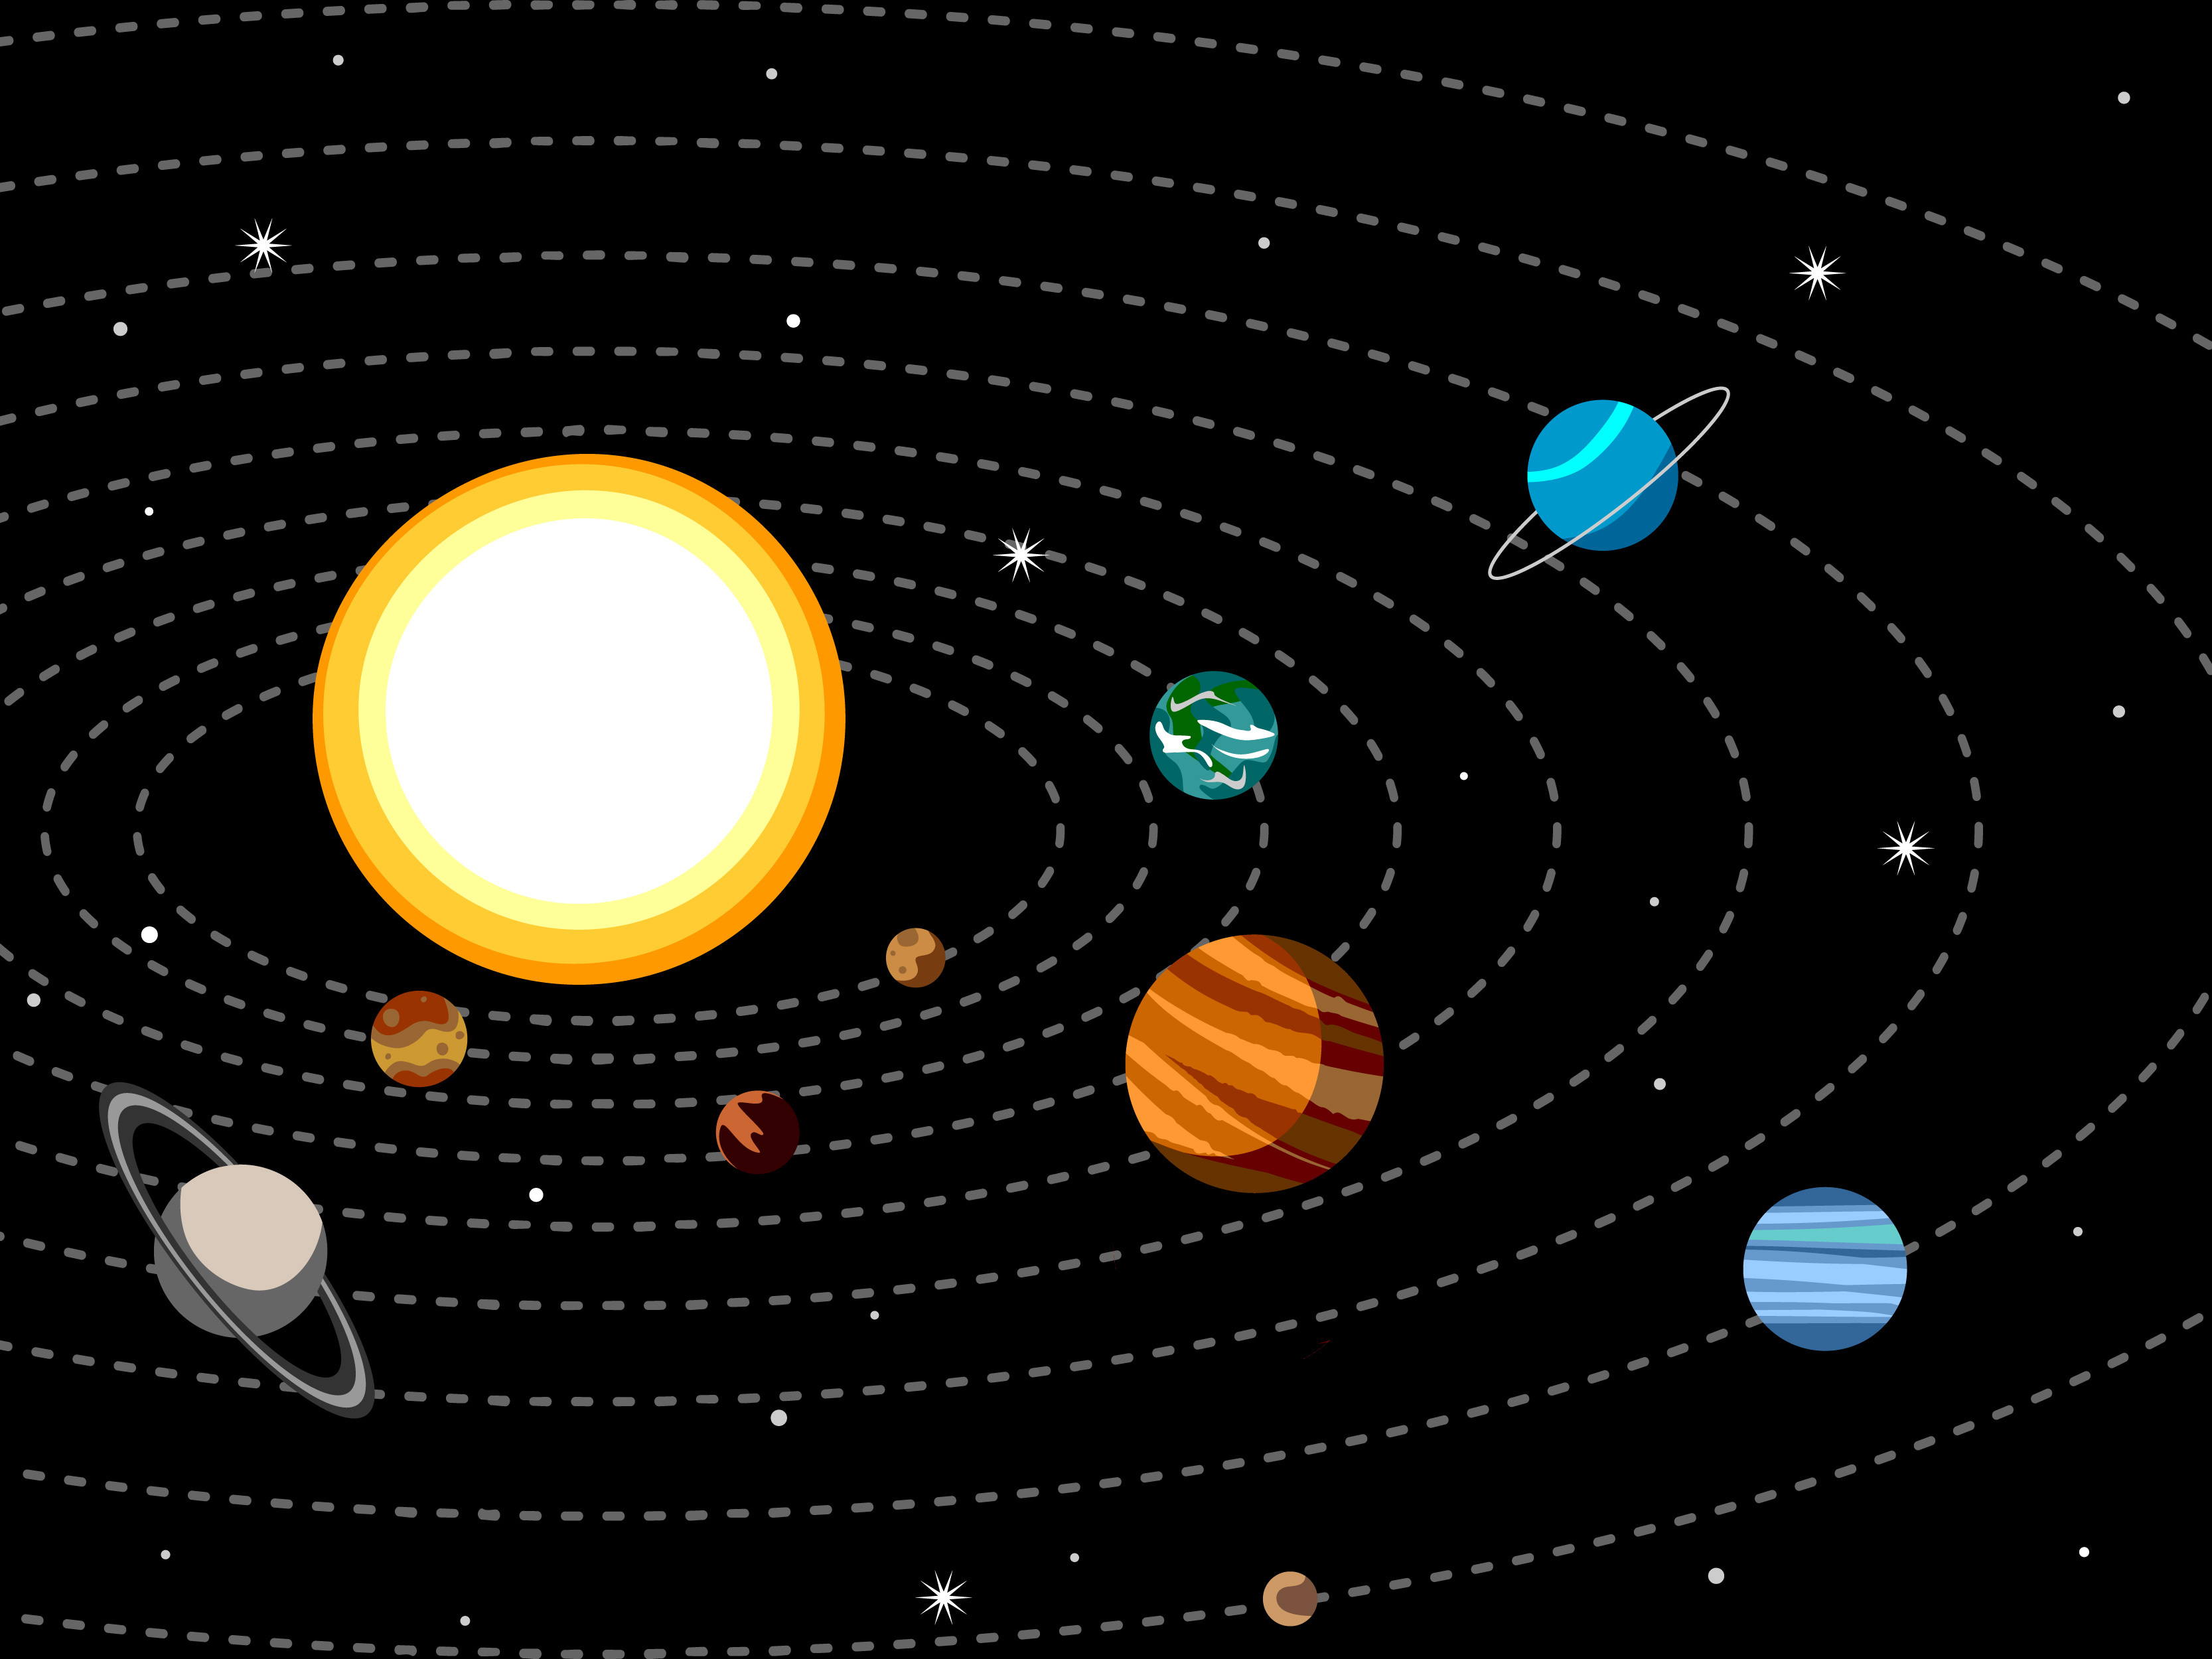 Gravity of Planets